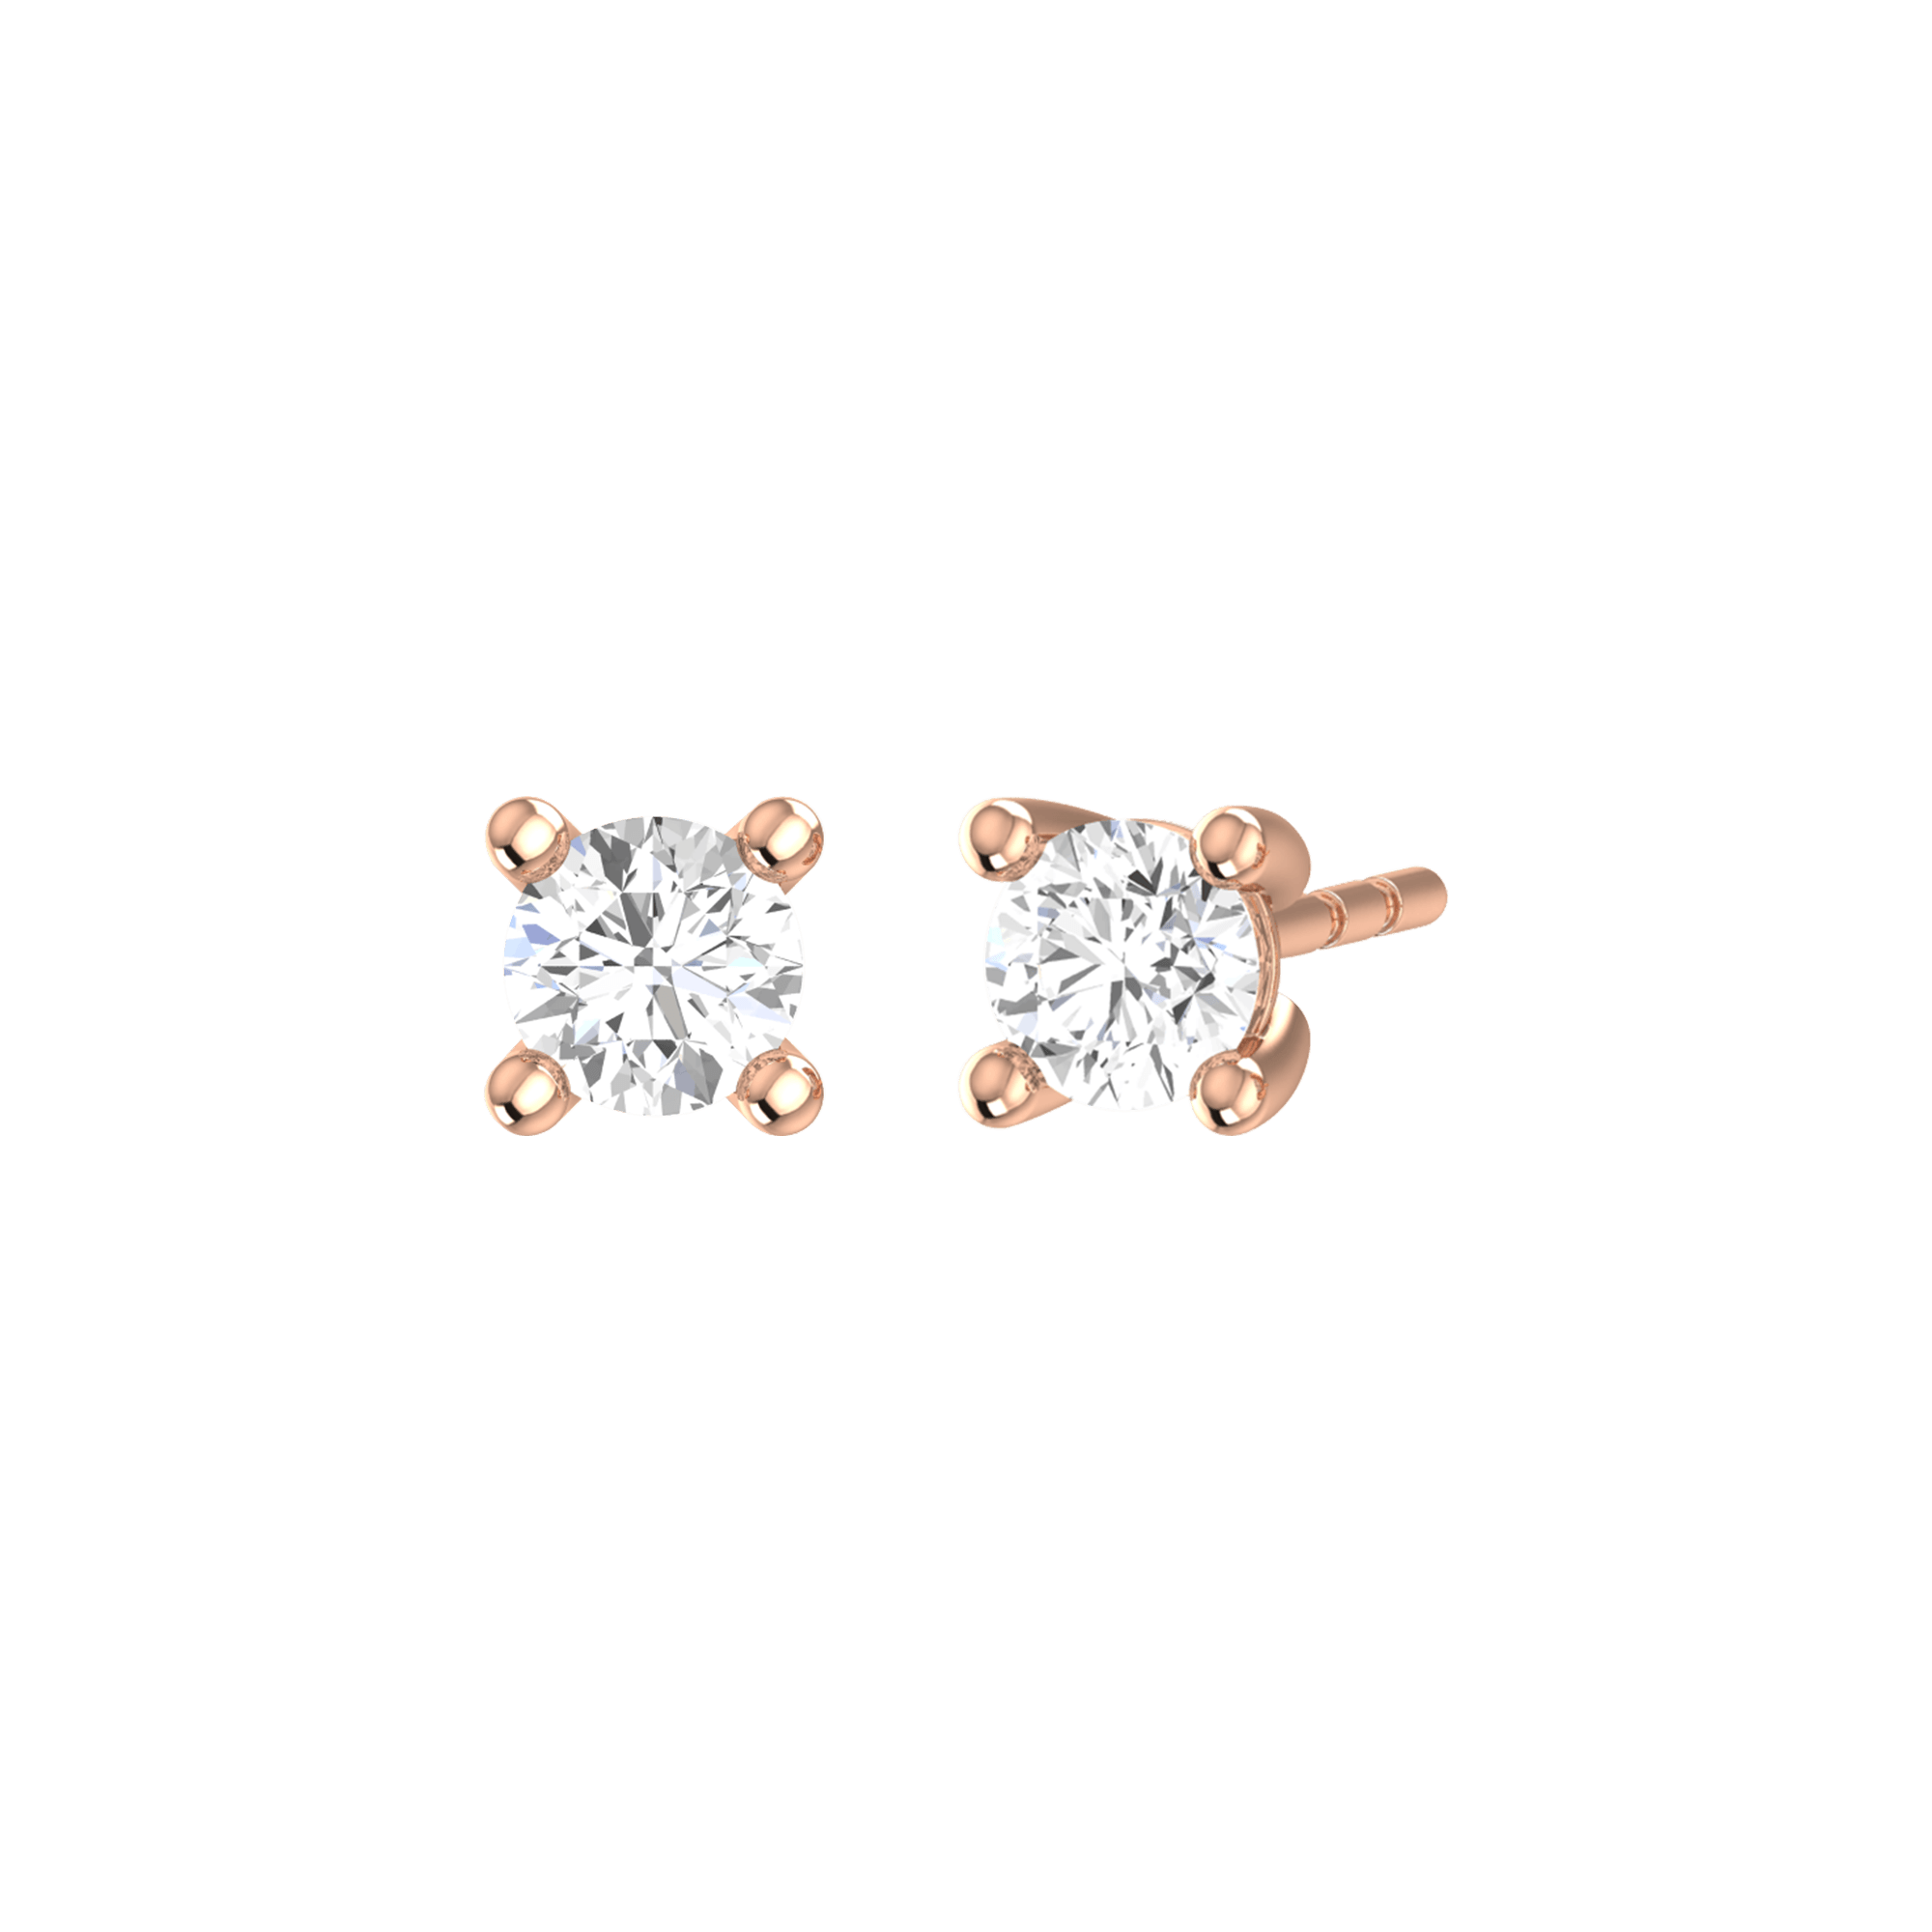 18K Gold Lab-Grown Diamond Solitaire Stud Earrings | 18K rose gold / Pair (0.4 carat)  | Jewelry | The Future Rocks